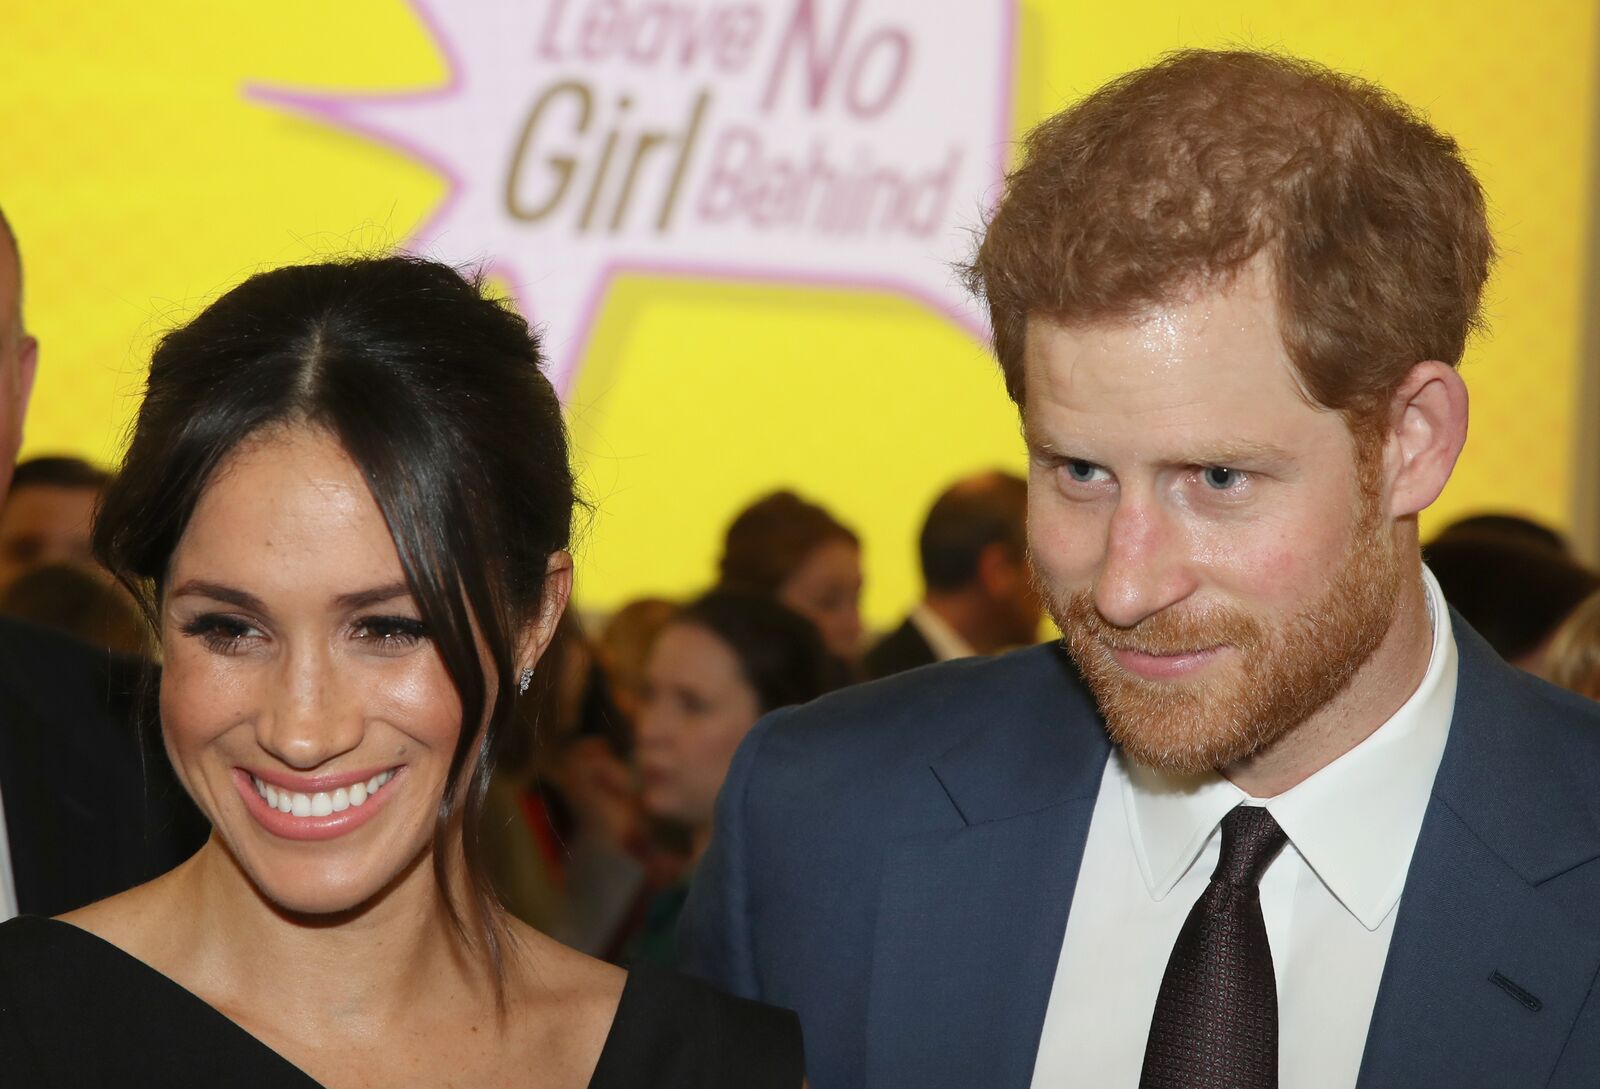 Meghan Markle and Prince Harry attend the Women's Empowerment reception hosted by Foreign Secretary Boris Johnson during the Commonwealth Heads of Government Meeting at the Royal Aeronautical Society. | Photo: Getty Images